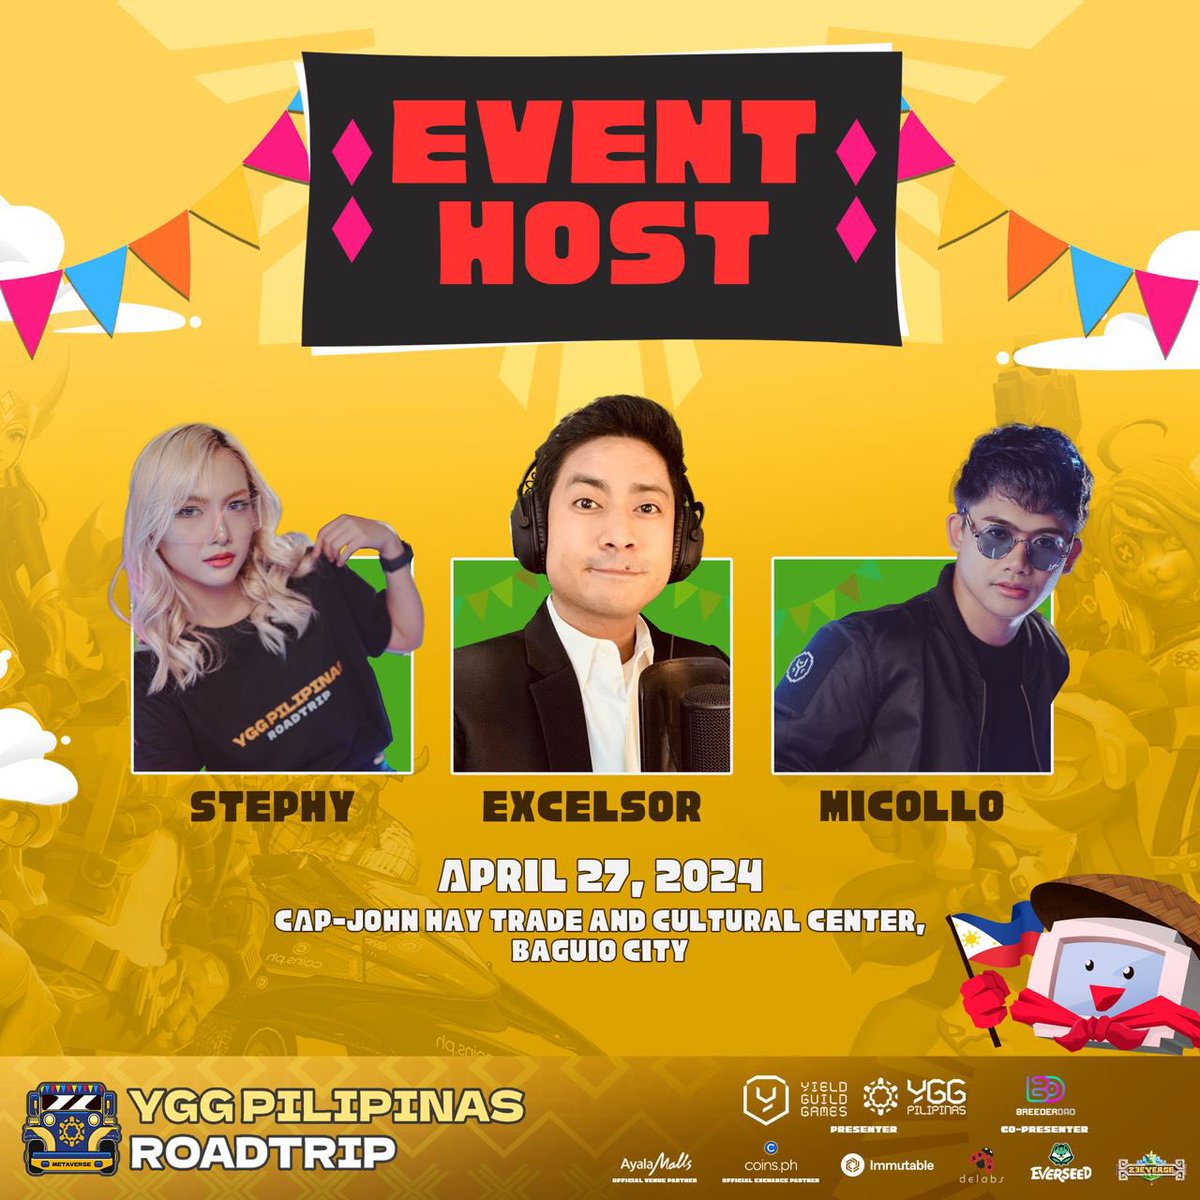 Baguio peeps are you ready? 👀

Because our event hosts @Stephyberry_, @excelsorph, @MiccoloSolis are very excited and ready to have fun and play the hottest web3 games with the community at the #YGGRoadtrip2024 Baguio! 🔥